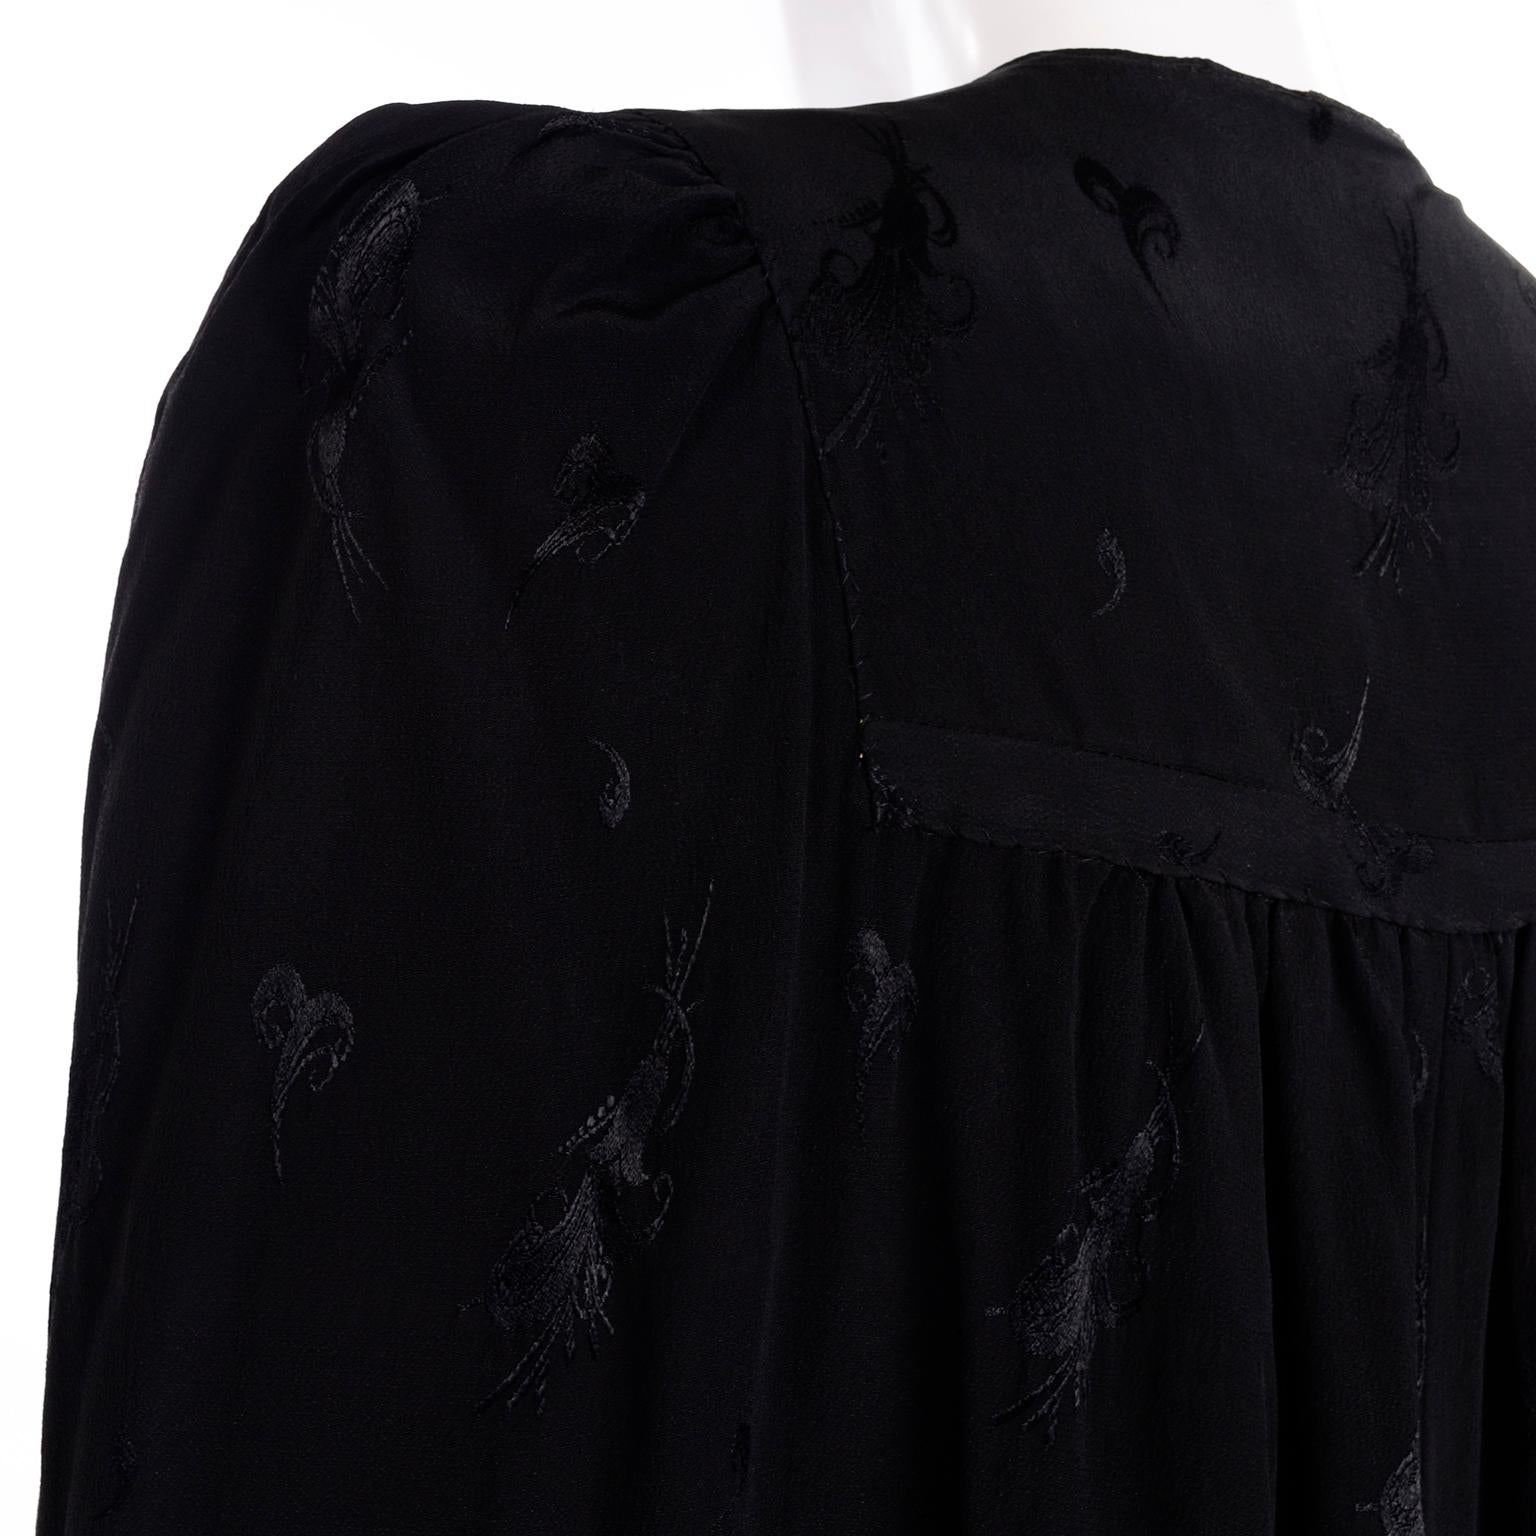 Vintage 1930s Reversible Printed Black Velvet Evening Cape In Excellent Condition For Sale In Portland, OR